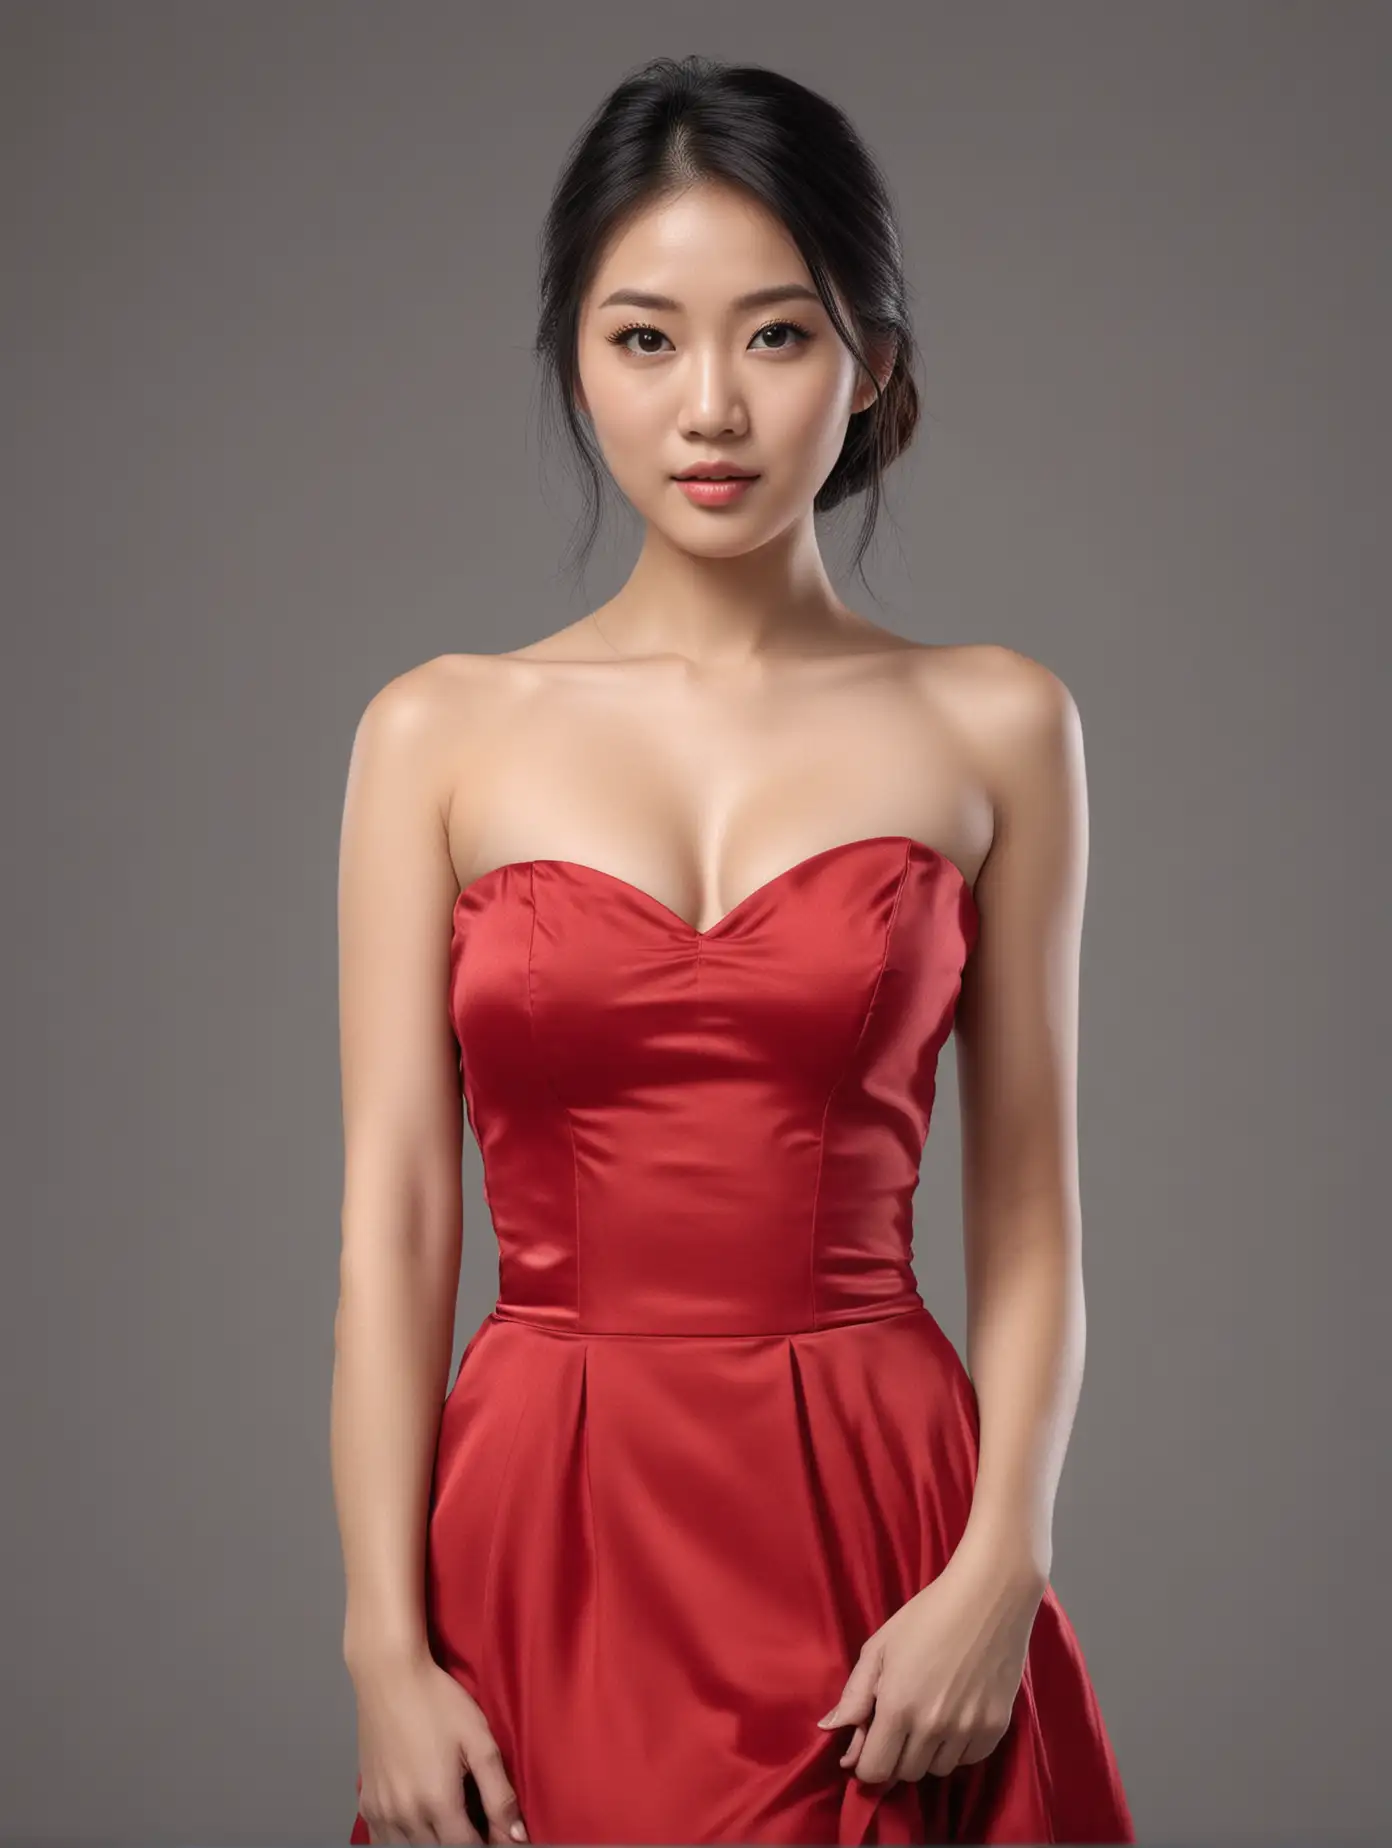 Elegant Asian Woman in Cherry Red Dress High Definition Portrait on Monochrome Background